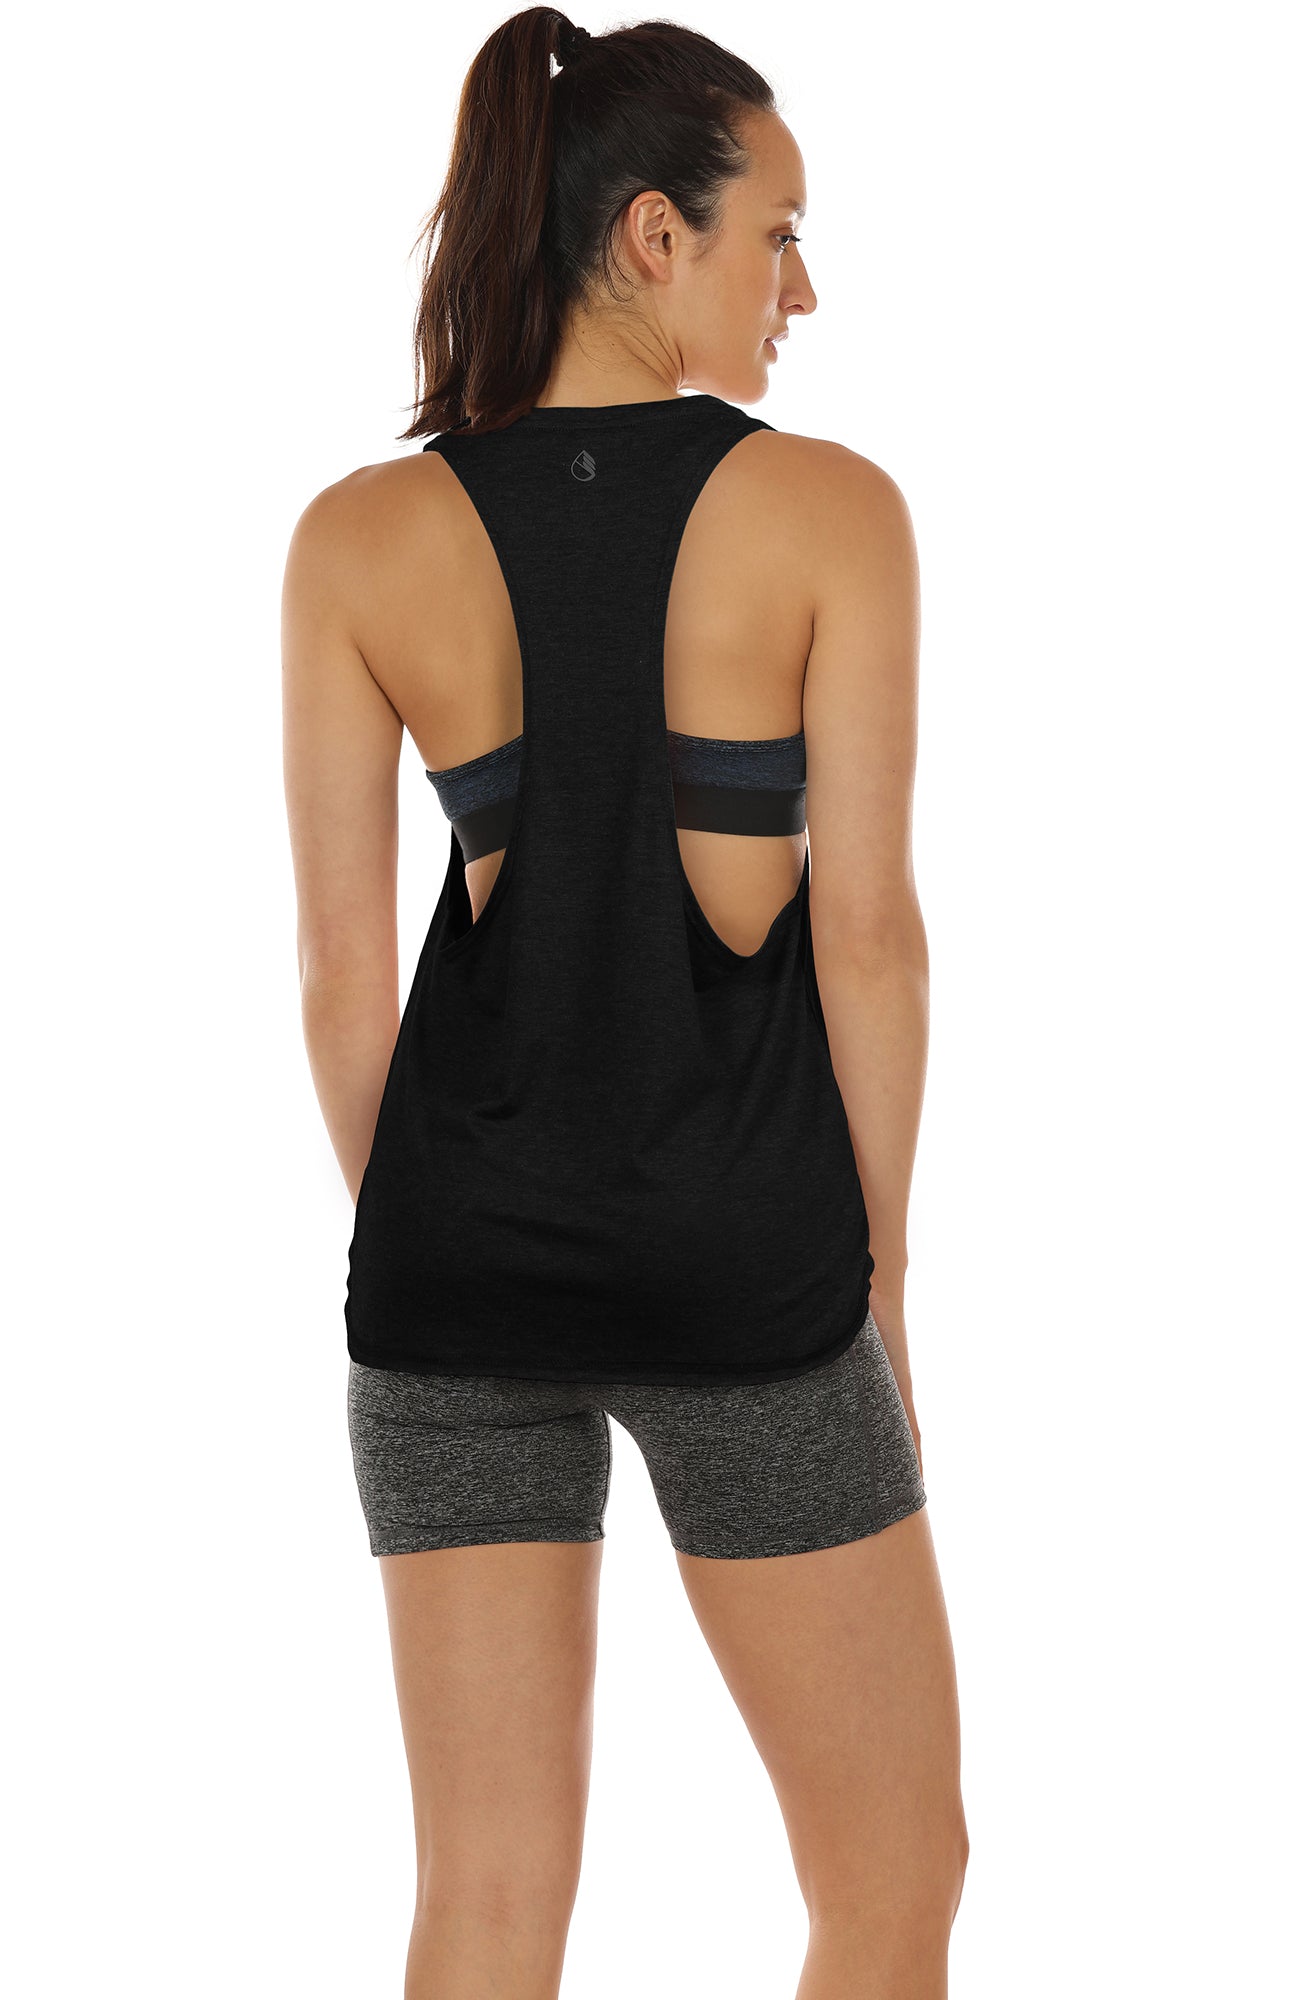 TK16-P icyzone Yoga Tops Activewear Workout Clothes Sports